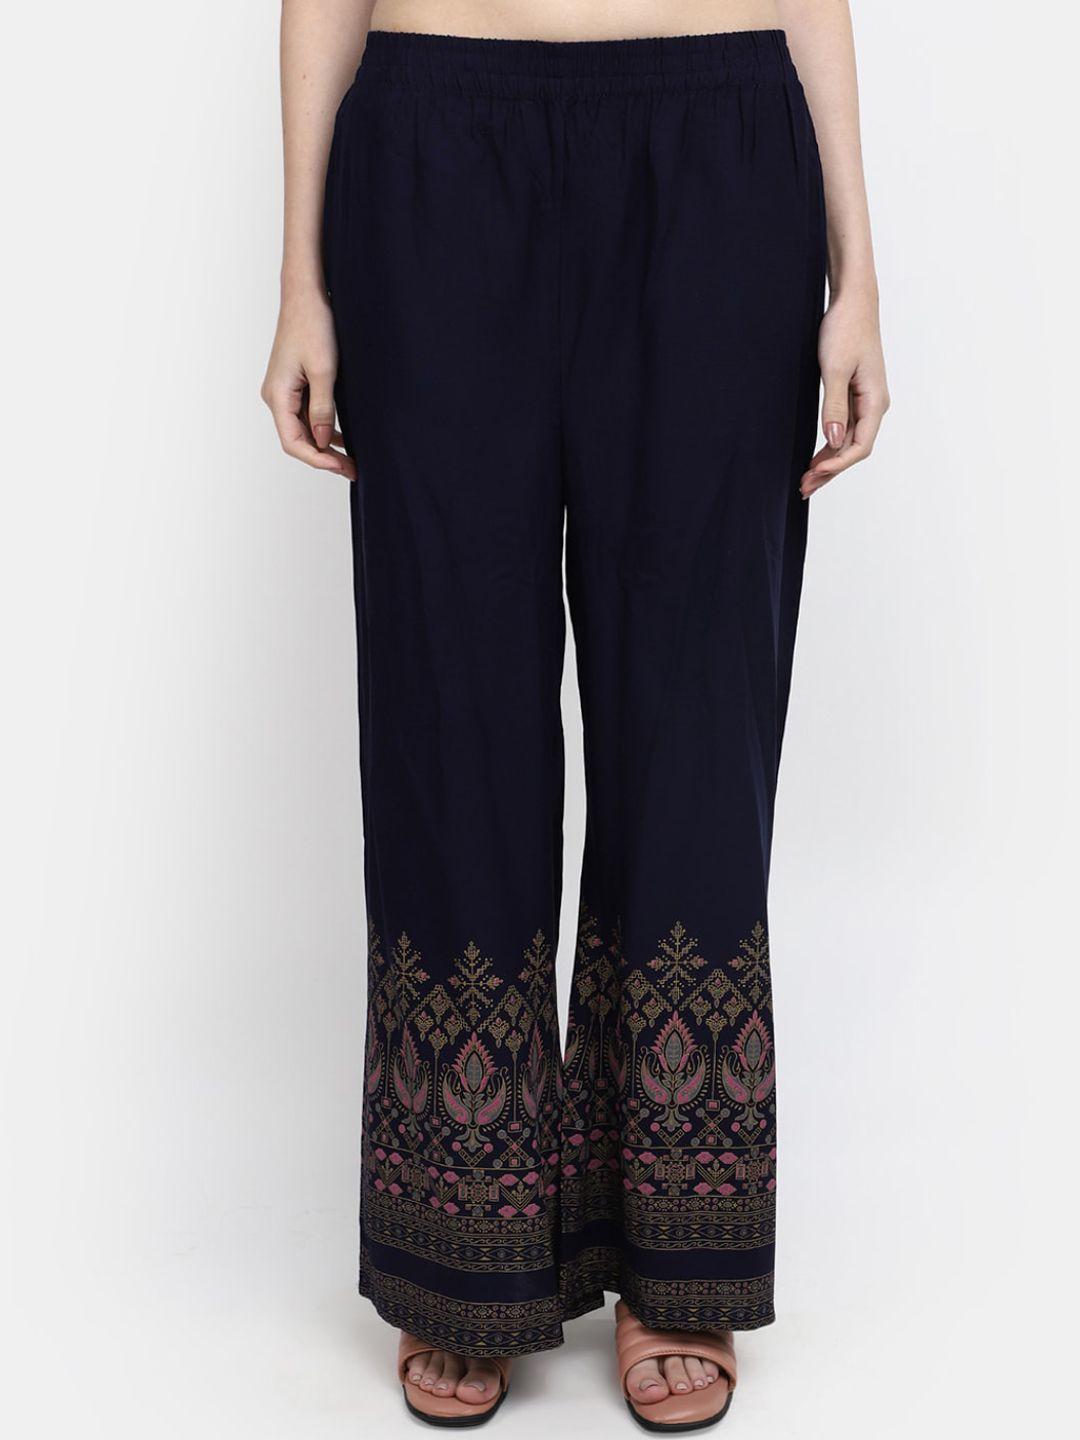 v-mart women ethnic motifs printed mid-rise regular fit parallel trousers